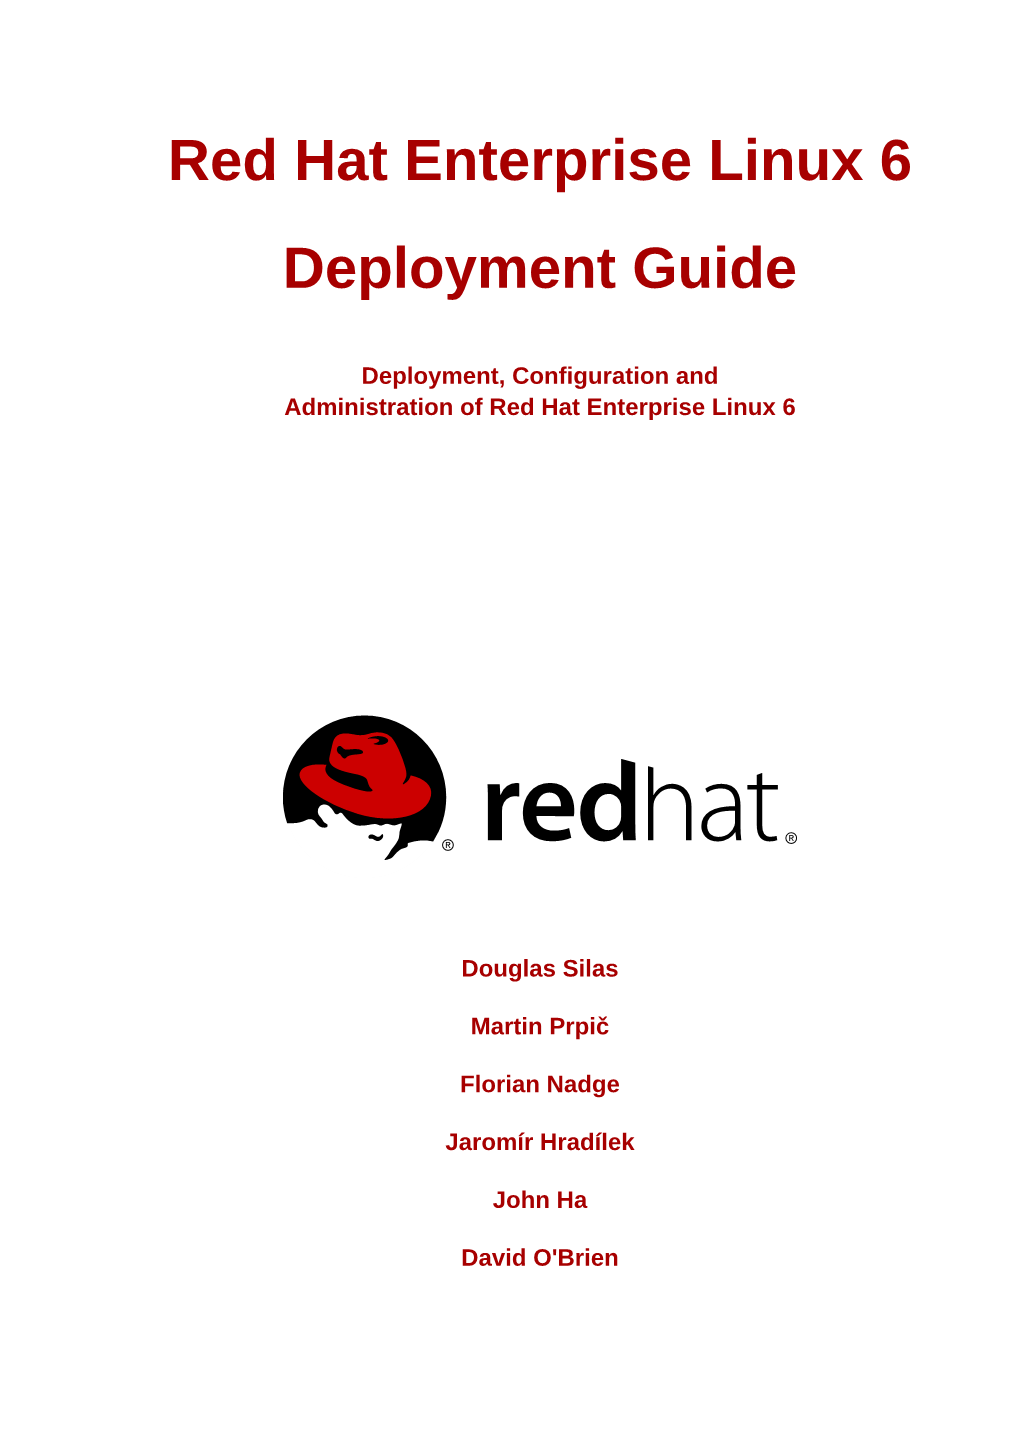 Deployment Guide